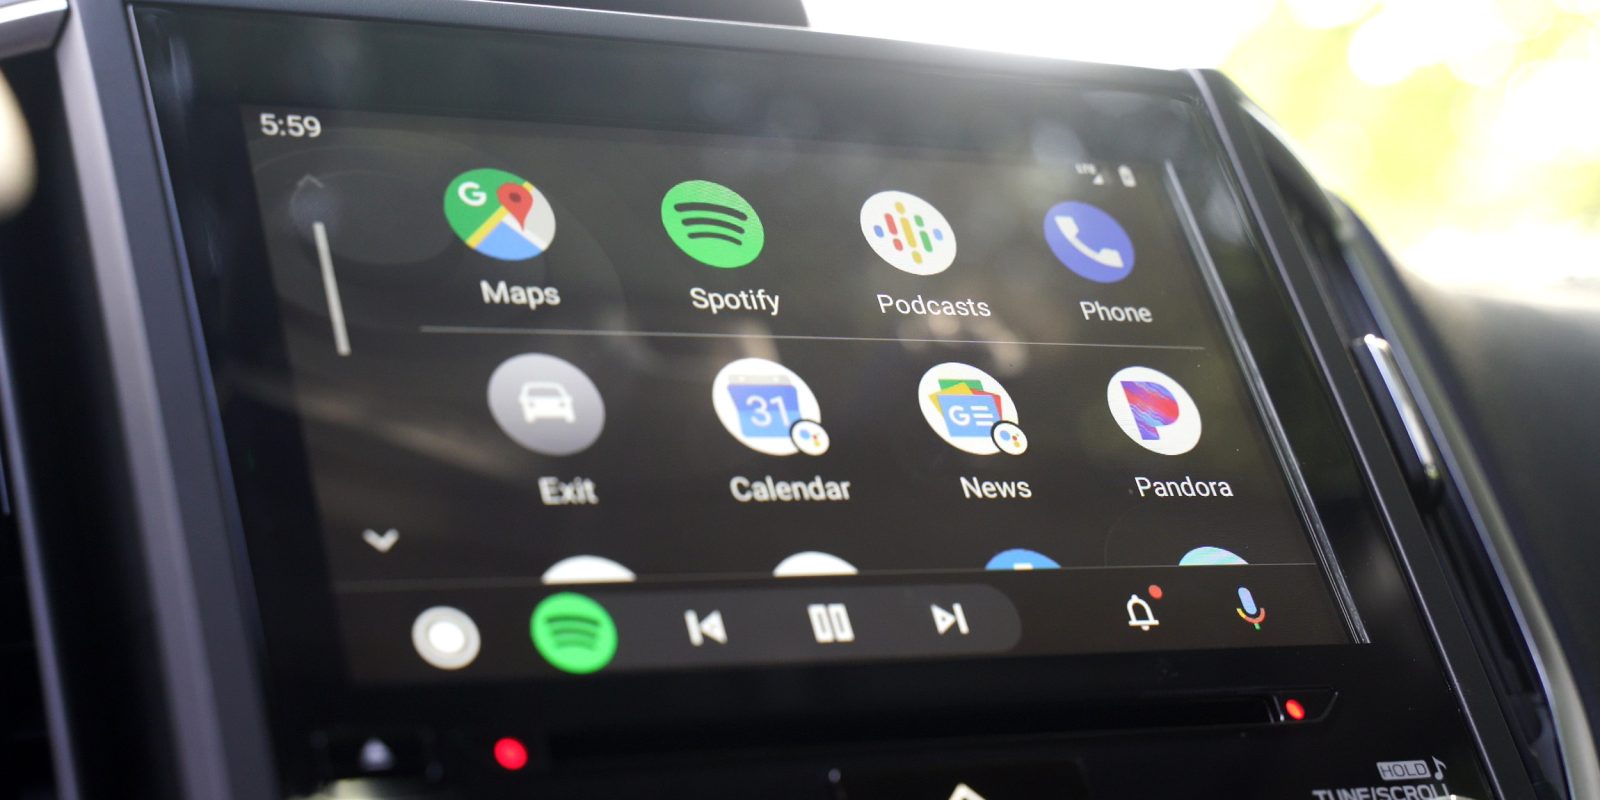 Android Auto tweaks its Google Assistant UI yet again ...